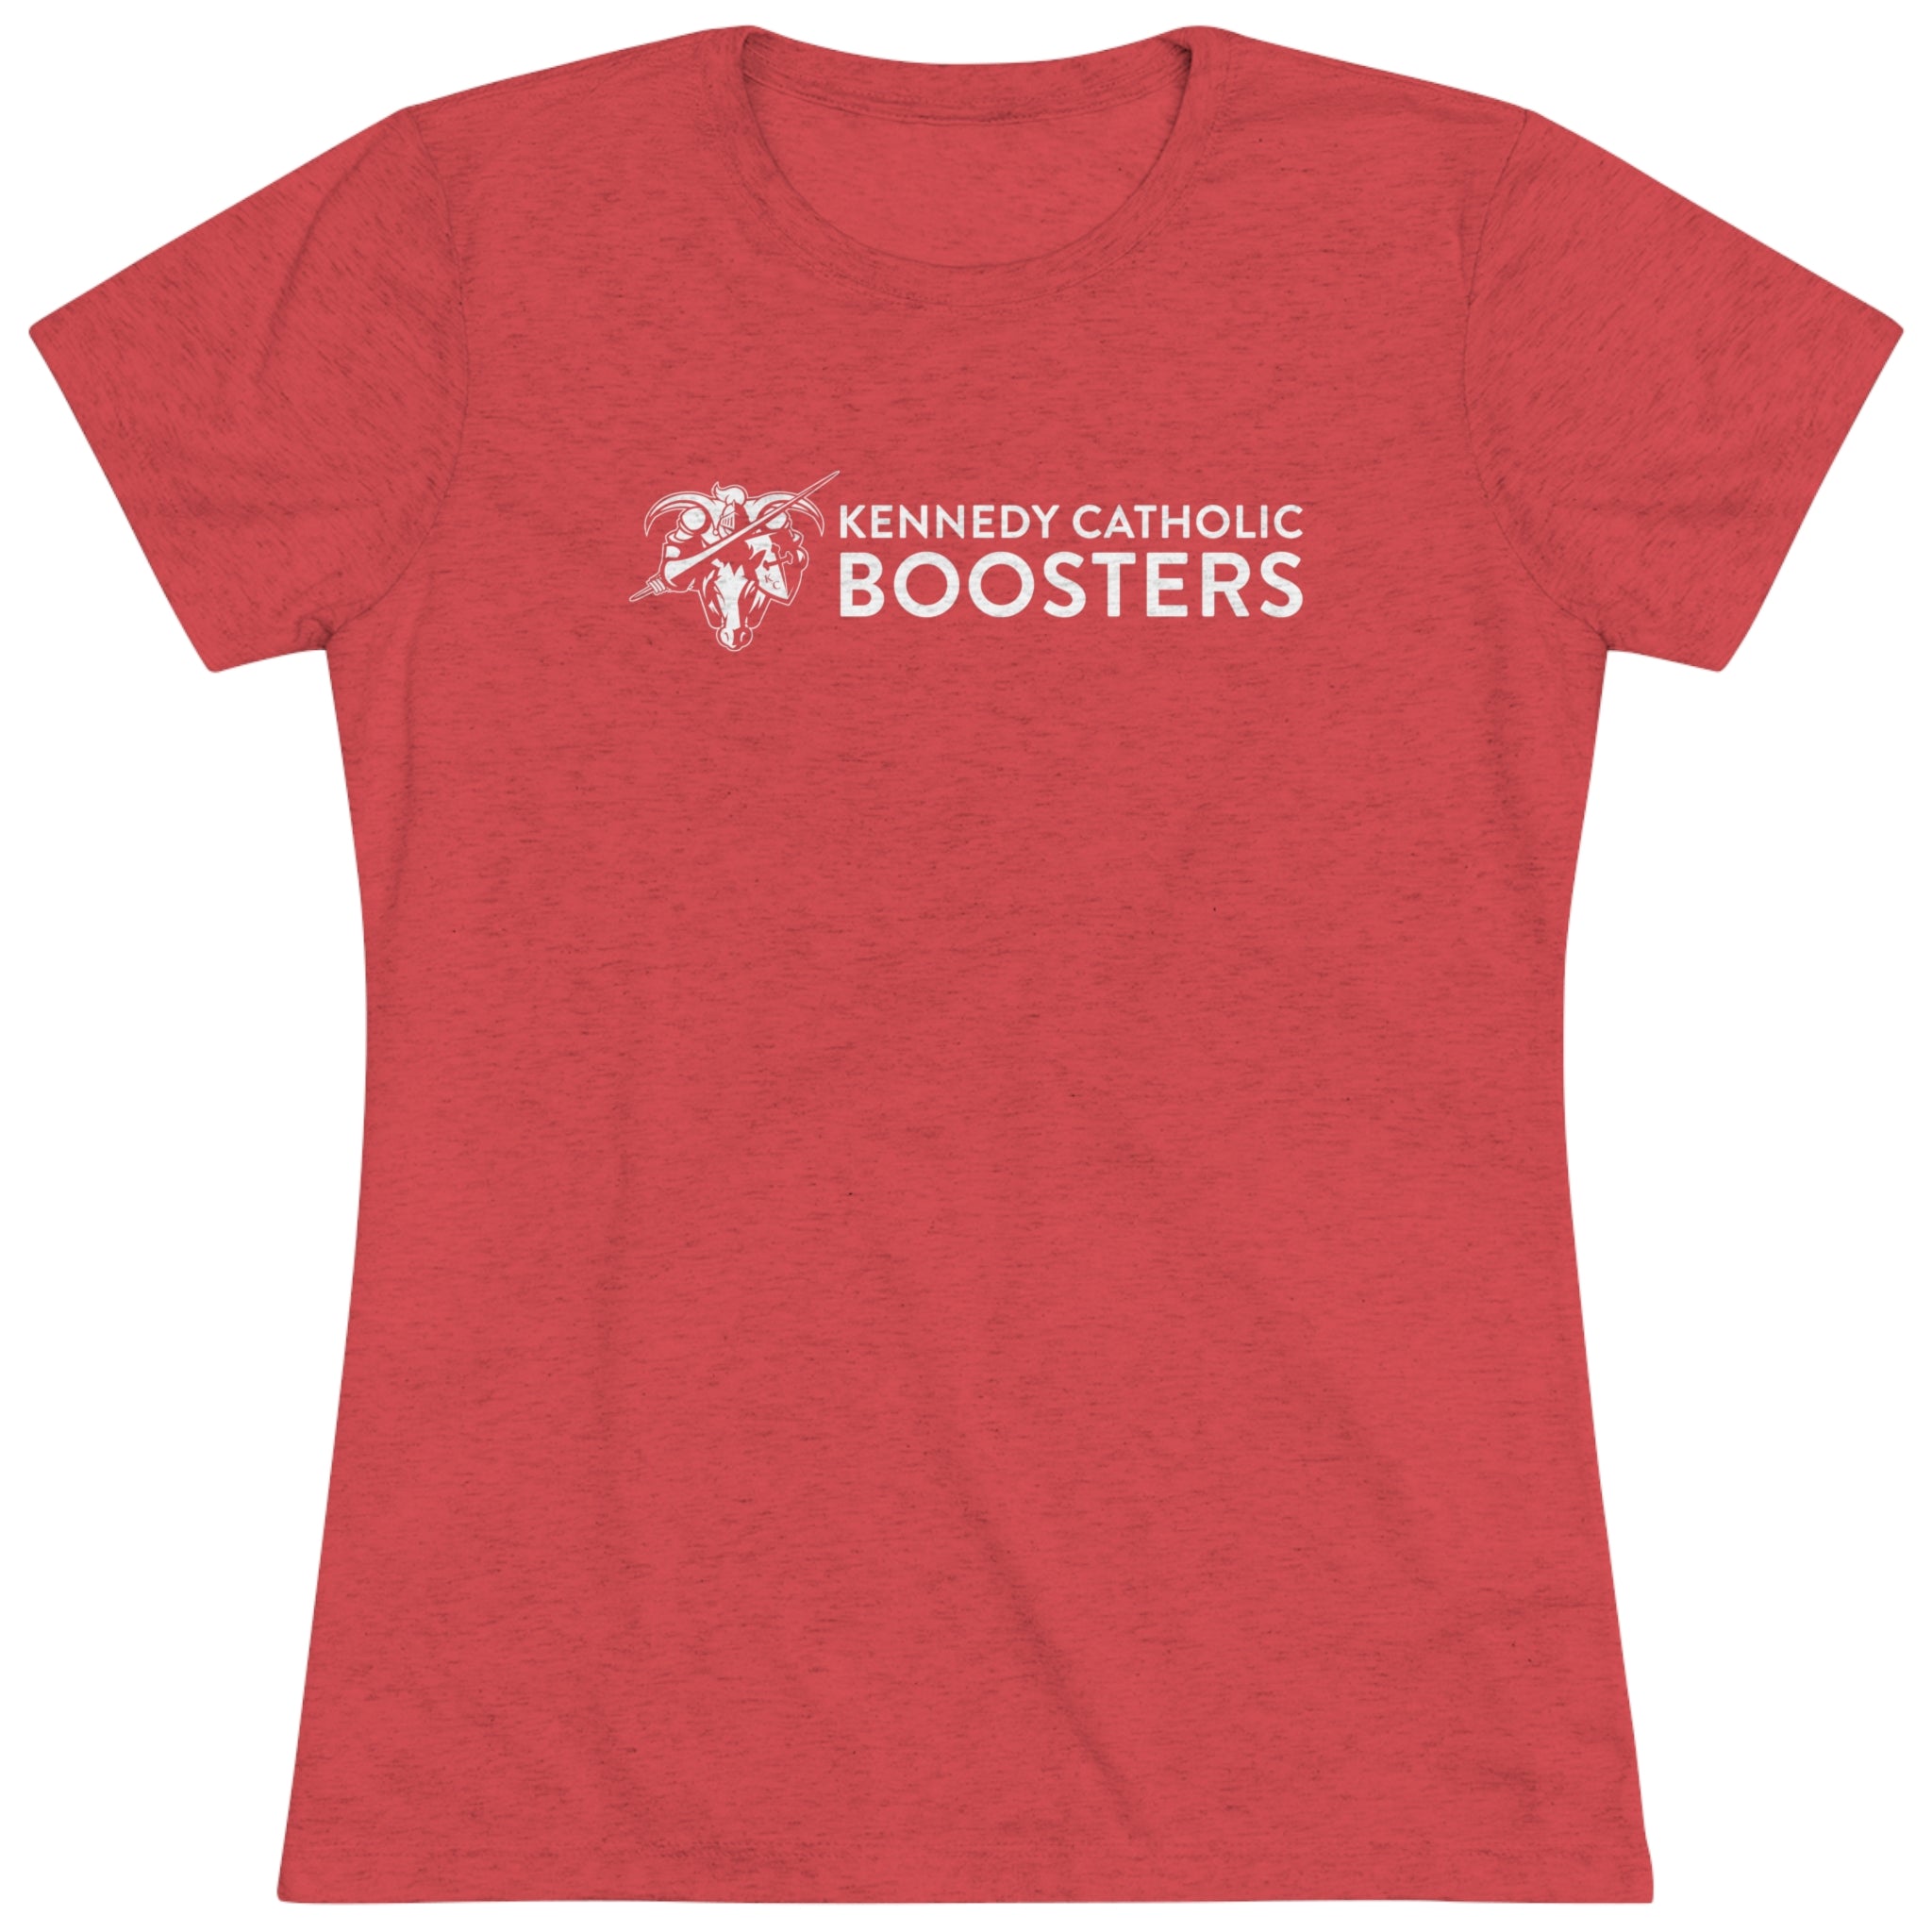 Kennedy Catholic Boosters Women's Triblend Tee